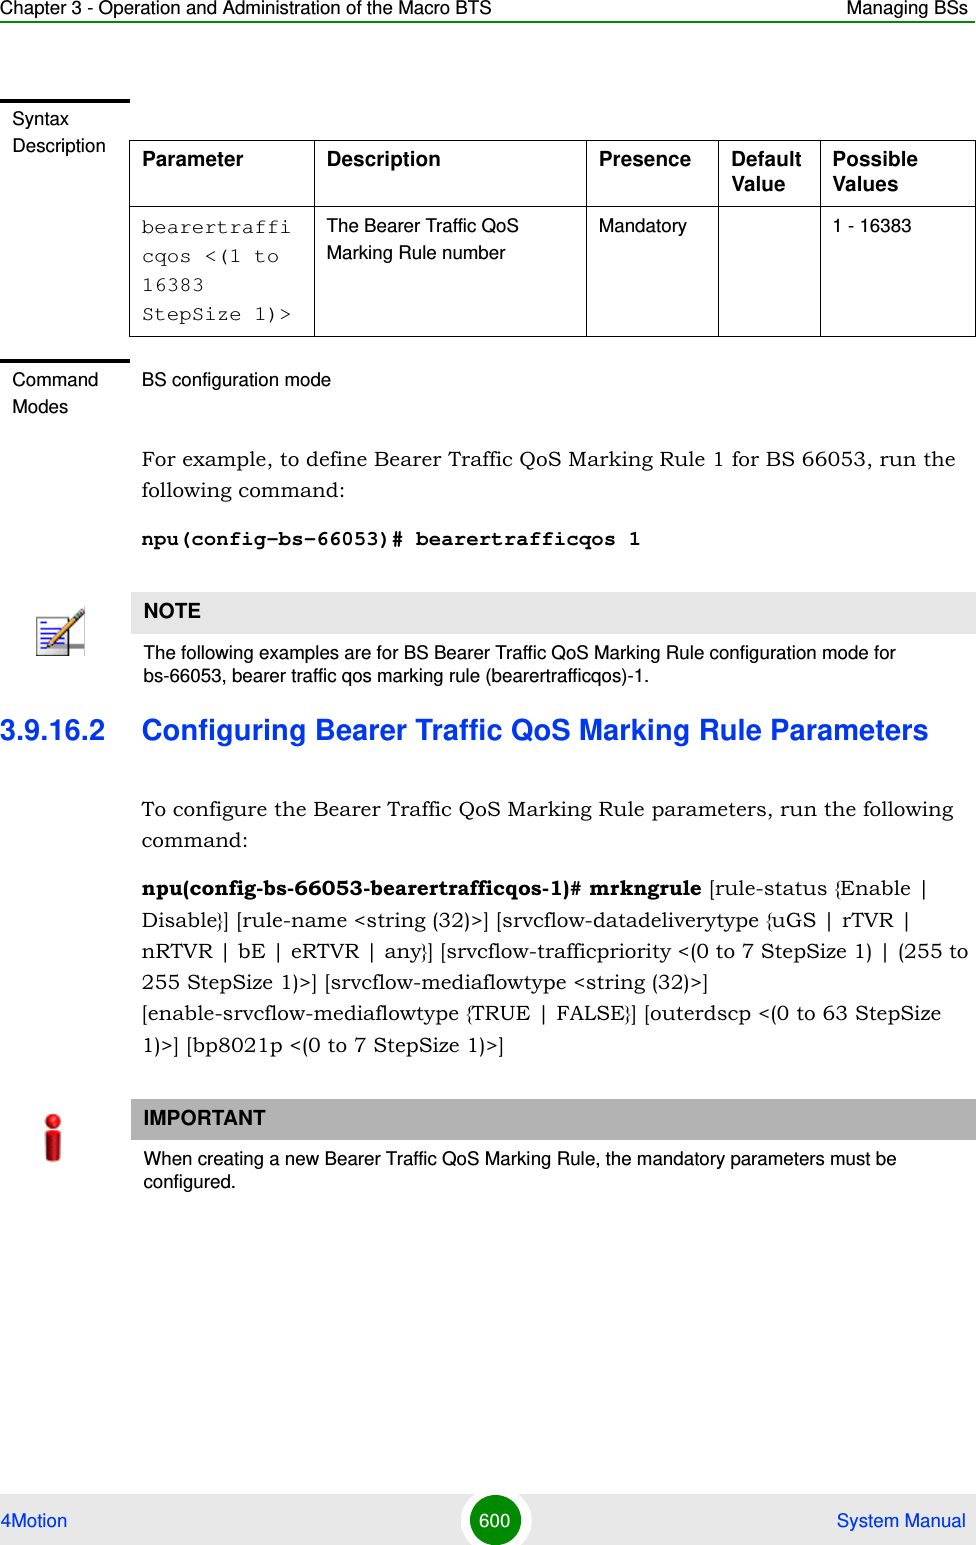 Chapter 3 - Operation and Administration of the Macro BTS Managing BSs4Motion 600  System ManualFor example, to define Bearer Traffic QoS Marking Rule 1 for BS 66053, run the following command:npu(config-bs-66053)# bearertrafficqos 13.9.16.2 Configuring Bearer Traffic QoS Marking Rule ParametersTo configure the Bearer Traffic QoS Marking Rule parameters, run the following command:npu(config-bs-66053-bearertrafficqos-1)# mrkngrule [rule-status {Enable | Disable}] [rule-name &lt;string (32)&gt;] [srvcflow-datadeliverytype {uGS | rTVR | nRTVR | bE | eRTVR | any}] [srvcflow-trafficpriority &lt;(0 to 7 StepSize 1) | (255 to 255 StepSize 1)&gt;] [srvcflow-mediaflowtype &lt;string (32)&gt;] [enable-srvcflow-mediaflowtype {TRUE | FALSE}] [outerdscp &lt;(0 to 63 StepSize 1)&gt;] [bp8021p &lt;(0 to 7 StepSize 1)&gt;]Syntax Description Parameter Description Presence Default ValuePossible Valuesbearertrafficqos &lt;(1 to 16383 StepSize 1)&gt;The Bearer Traffic QoS Marking Rule numberMandatory 1 - 16383Command ModesBS configuration modeNOTEThe following examples are for BS Bearer Traffic QoS Marking Rule configuration mode for bs-66053, bearer traffic qos marking rule (bearertrafficqos)-1.IMPORTANTWhen creating a new Bearer Traffic QoS Marking Rule, the mandatory parameters must be configured.